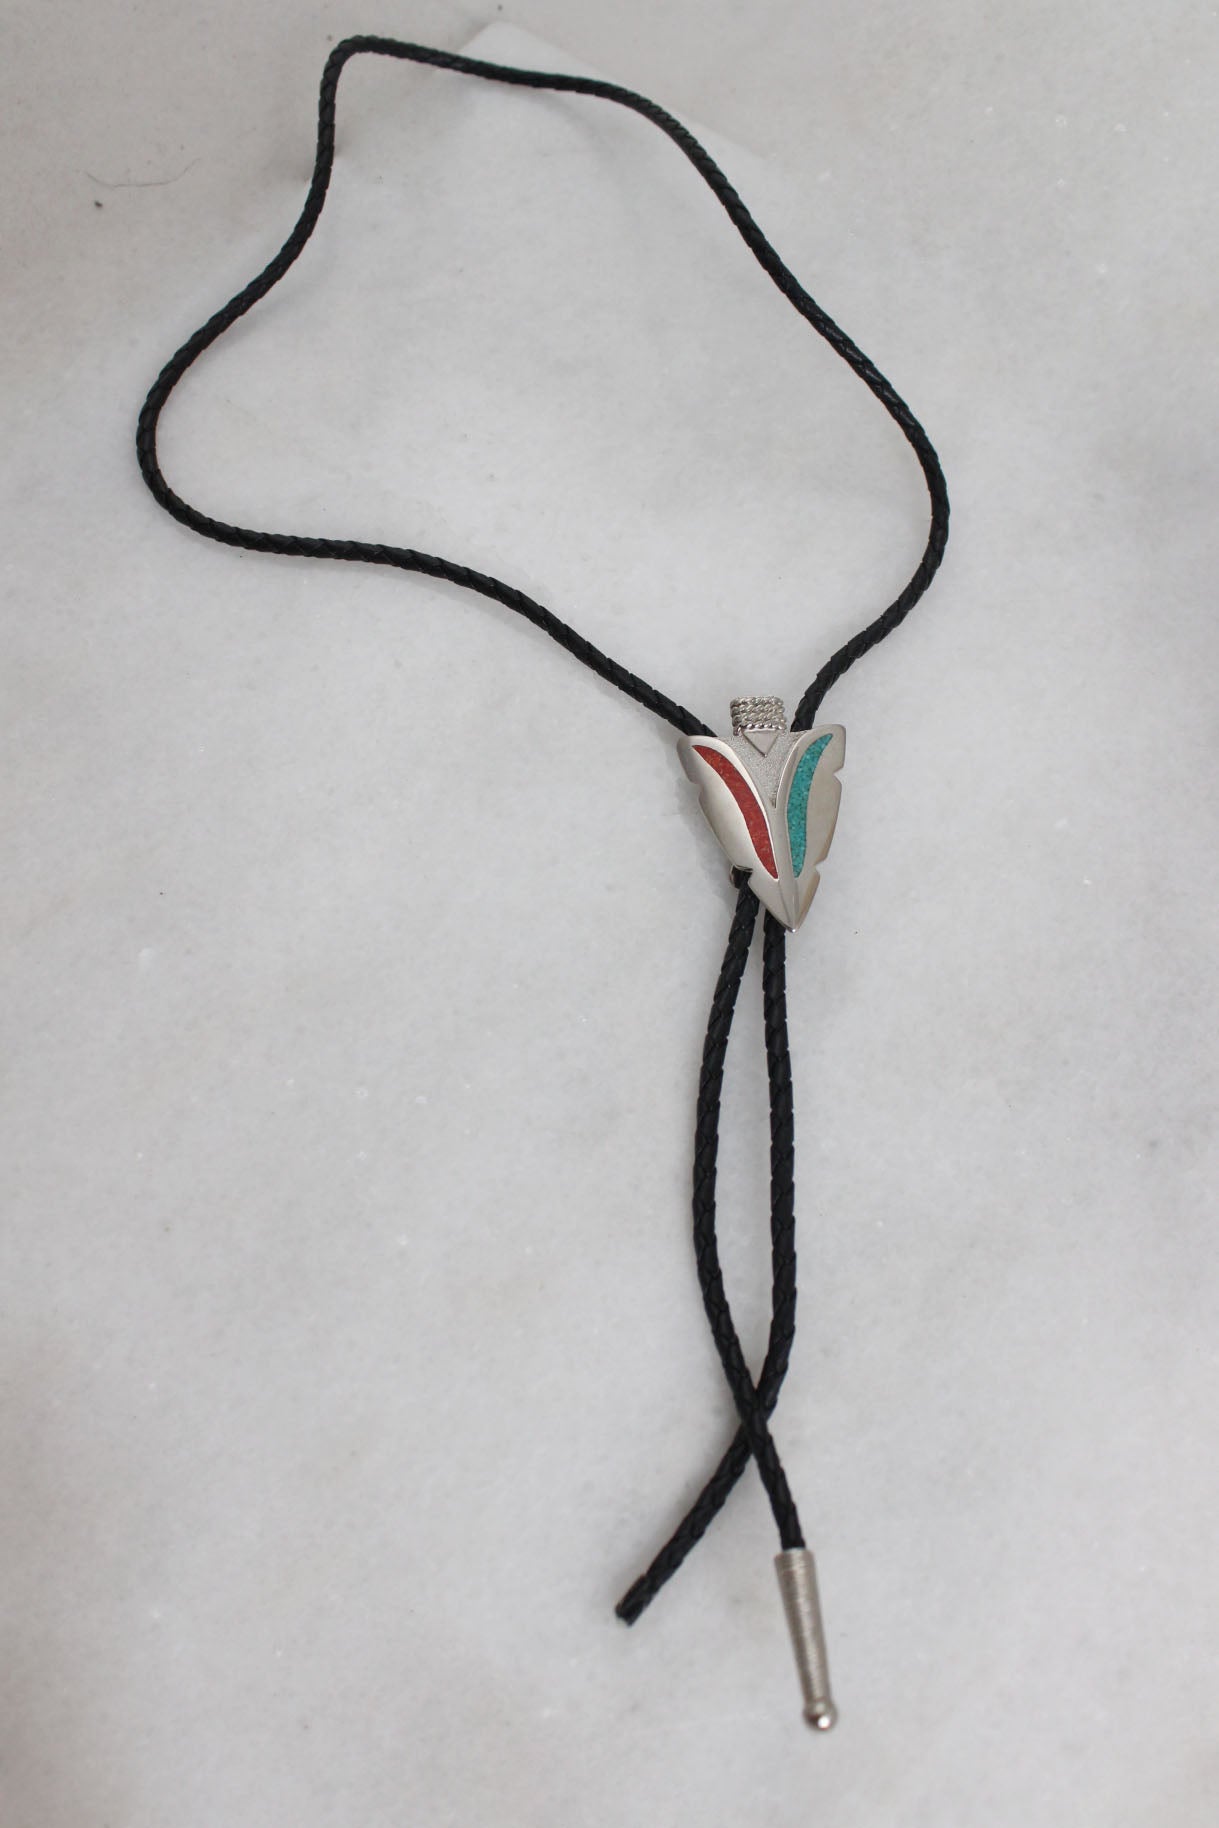 top view of bolo tie laid flat showcasing the missing metallic tip